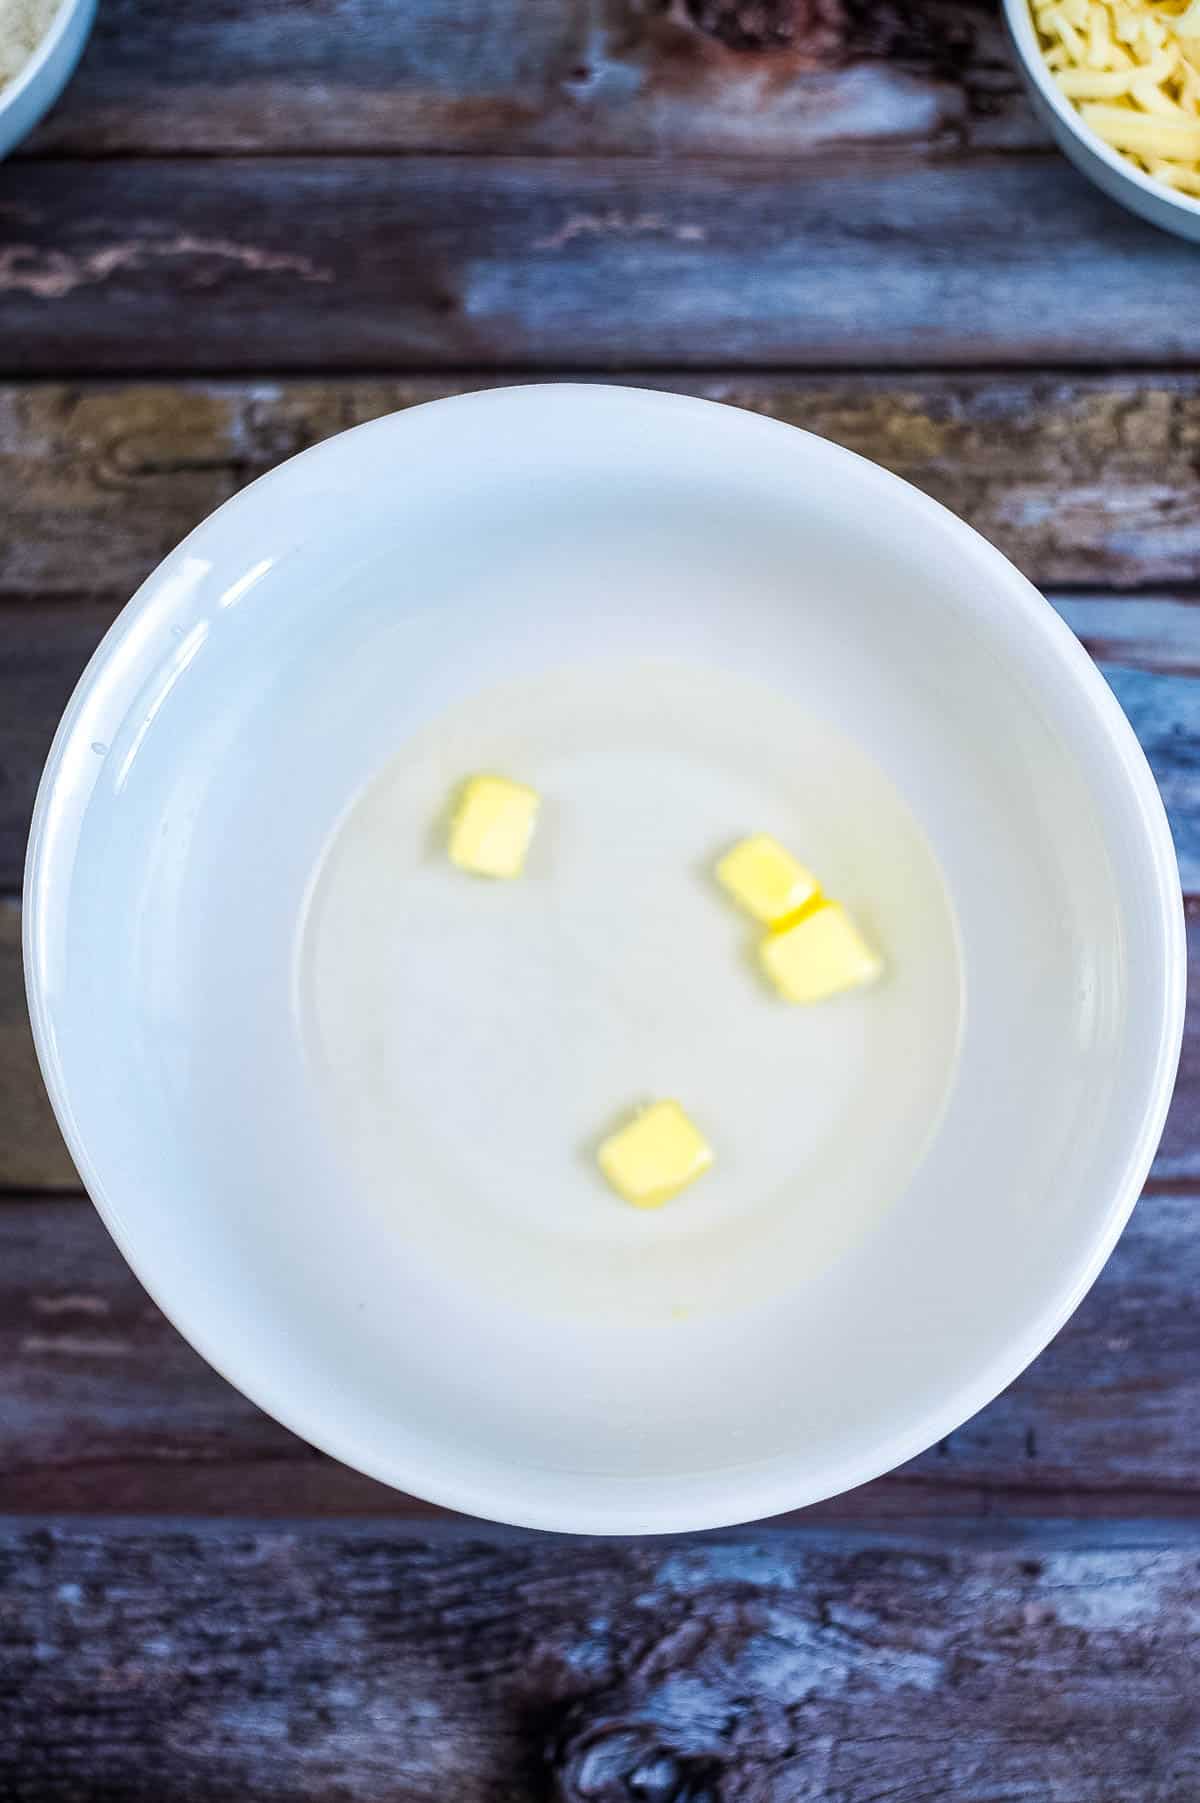 A white bowl filled with butter and cheese, part of an arepas recipe, on a wooden table.